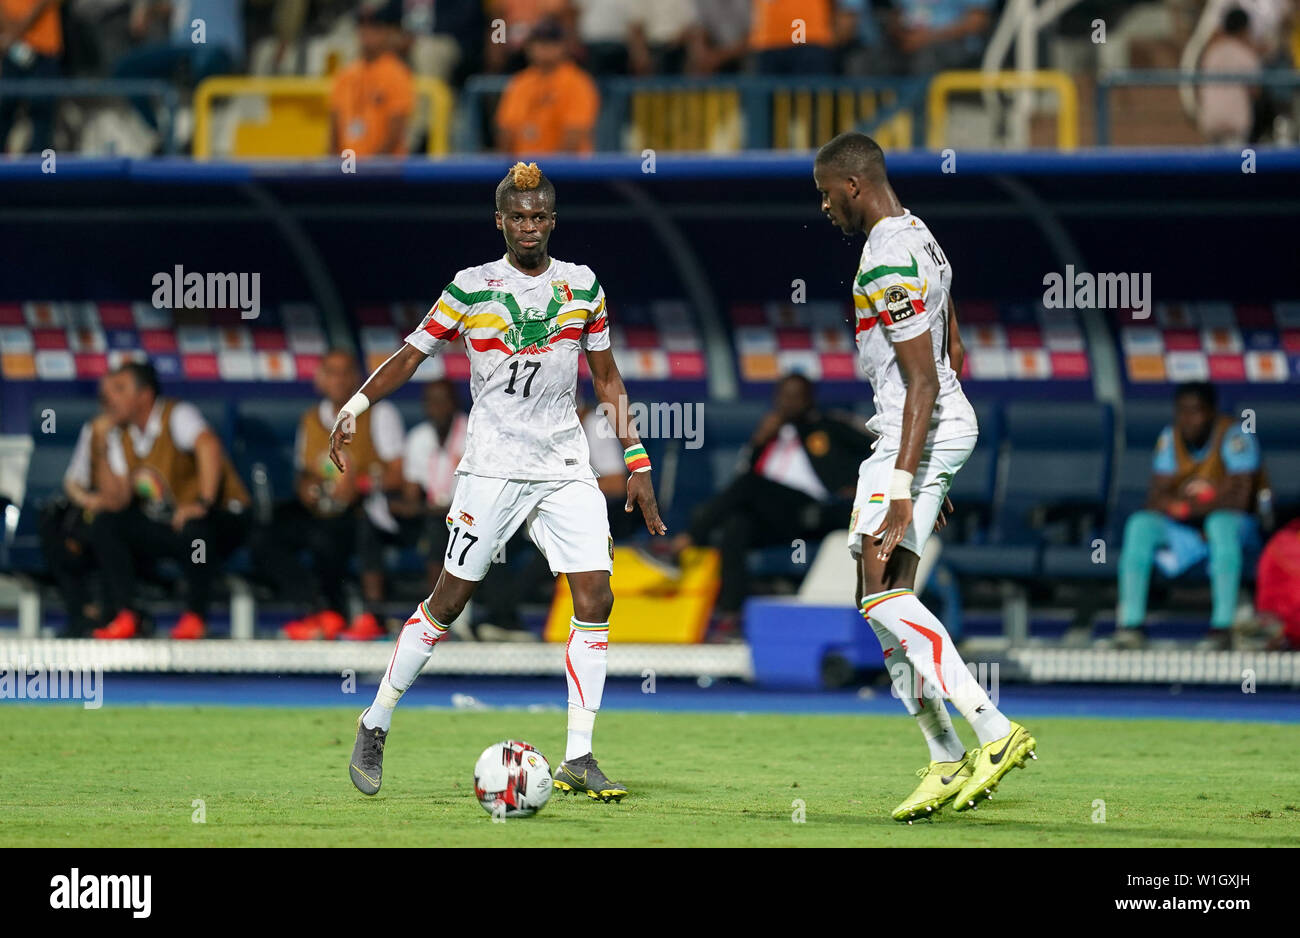 Ismailia, Egypt. 2nd July, 2019. Falaye Sacko of Mali during the 2019 African Cup of Nations match between Angola and Mali at the Ismailia Stadium in Ismailia, Egypt. Ulrik Pedersen/CSM/Alamy Live News Stock Photo